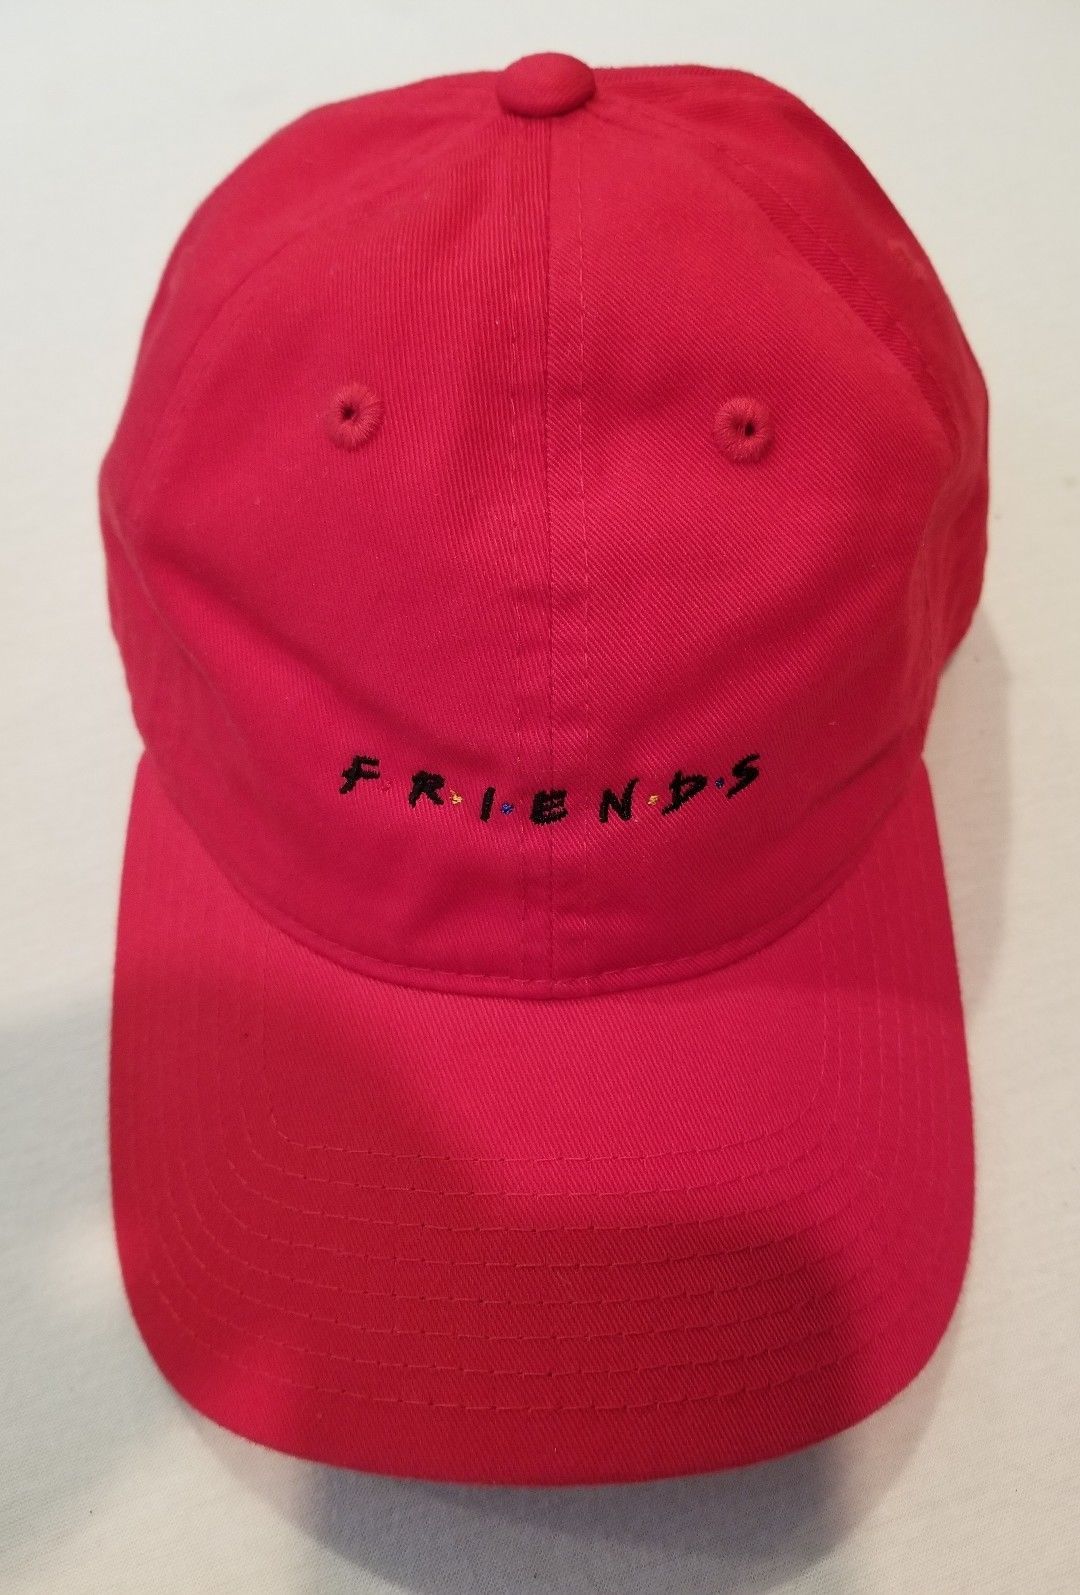 New Friends TV Series Adjustable Strap Red Dad Hat Baseball Cap - Hats